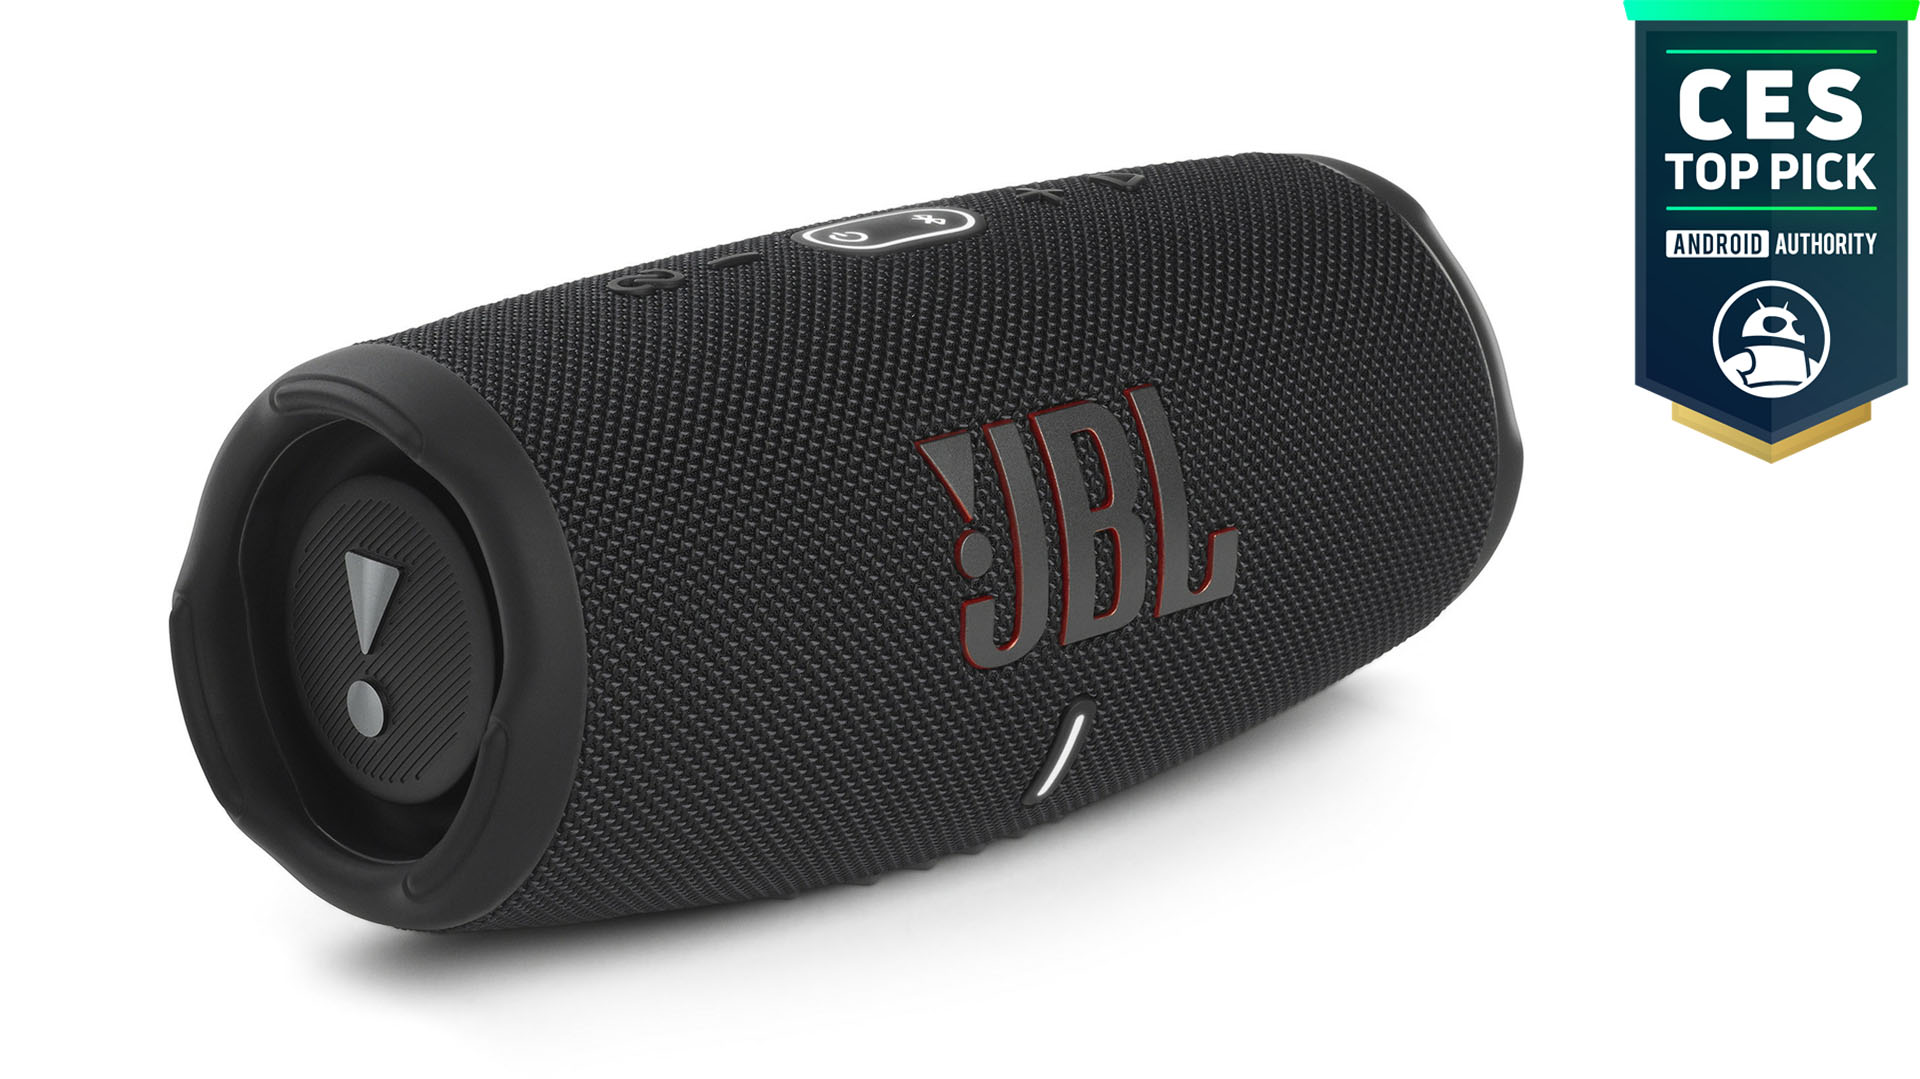 JBL Charge 5 CES 2021 Top Pick Award